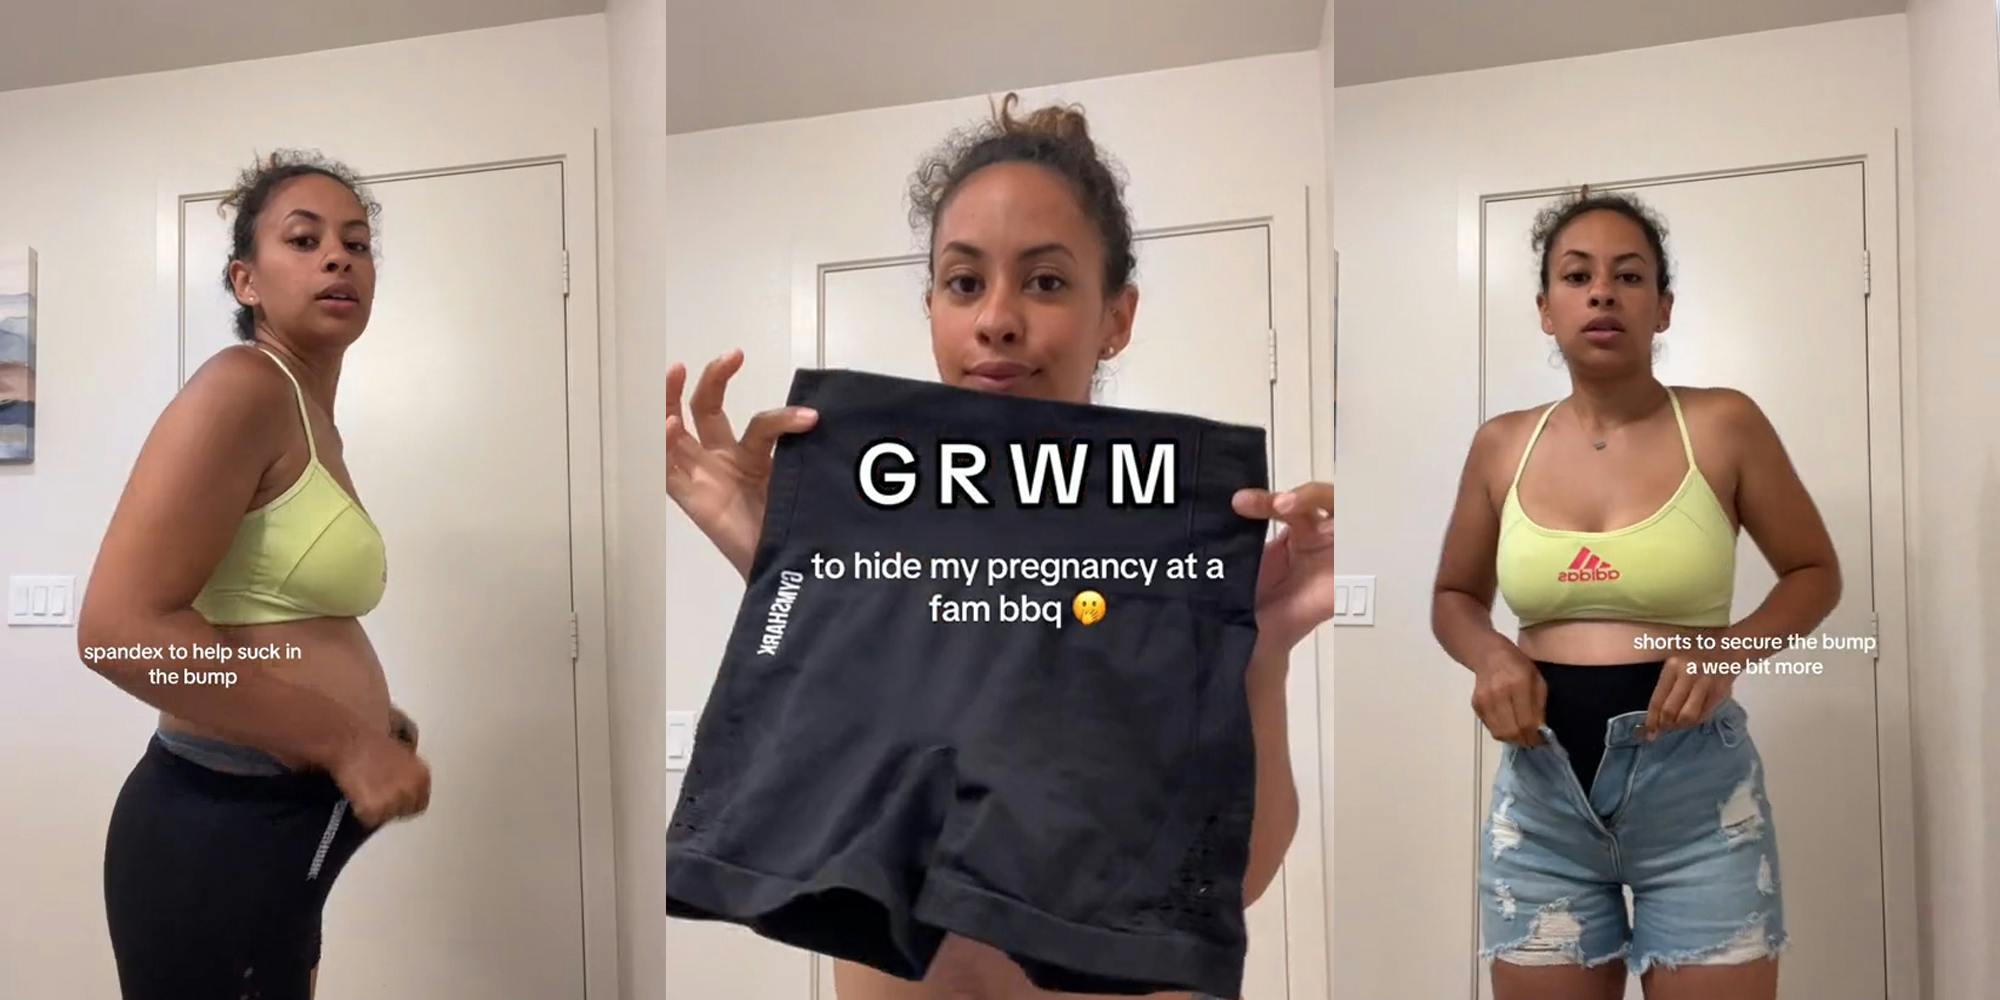 woman putting on shorts with caption "spandex to help suck in the bump" (l) woman holding shorts with caption "GRWM to hide my pregnancy at a fam bbq" (c) woman putting on shorts with caption "shorts to secure the bump a wee bit more" (r)